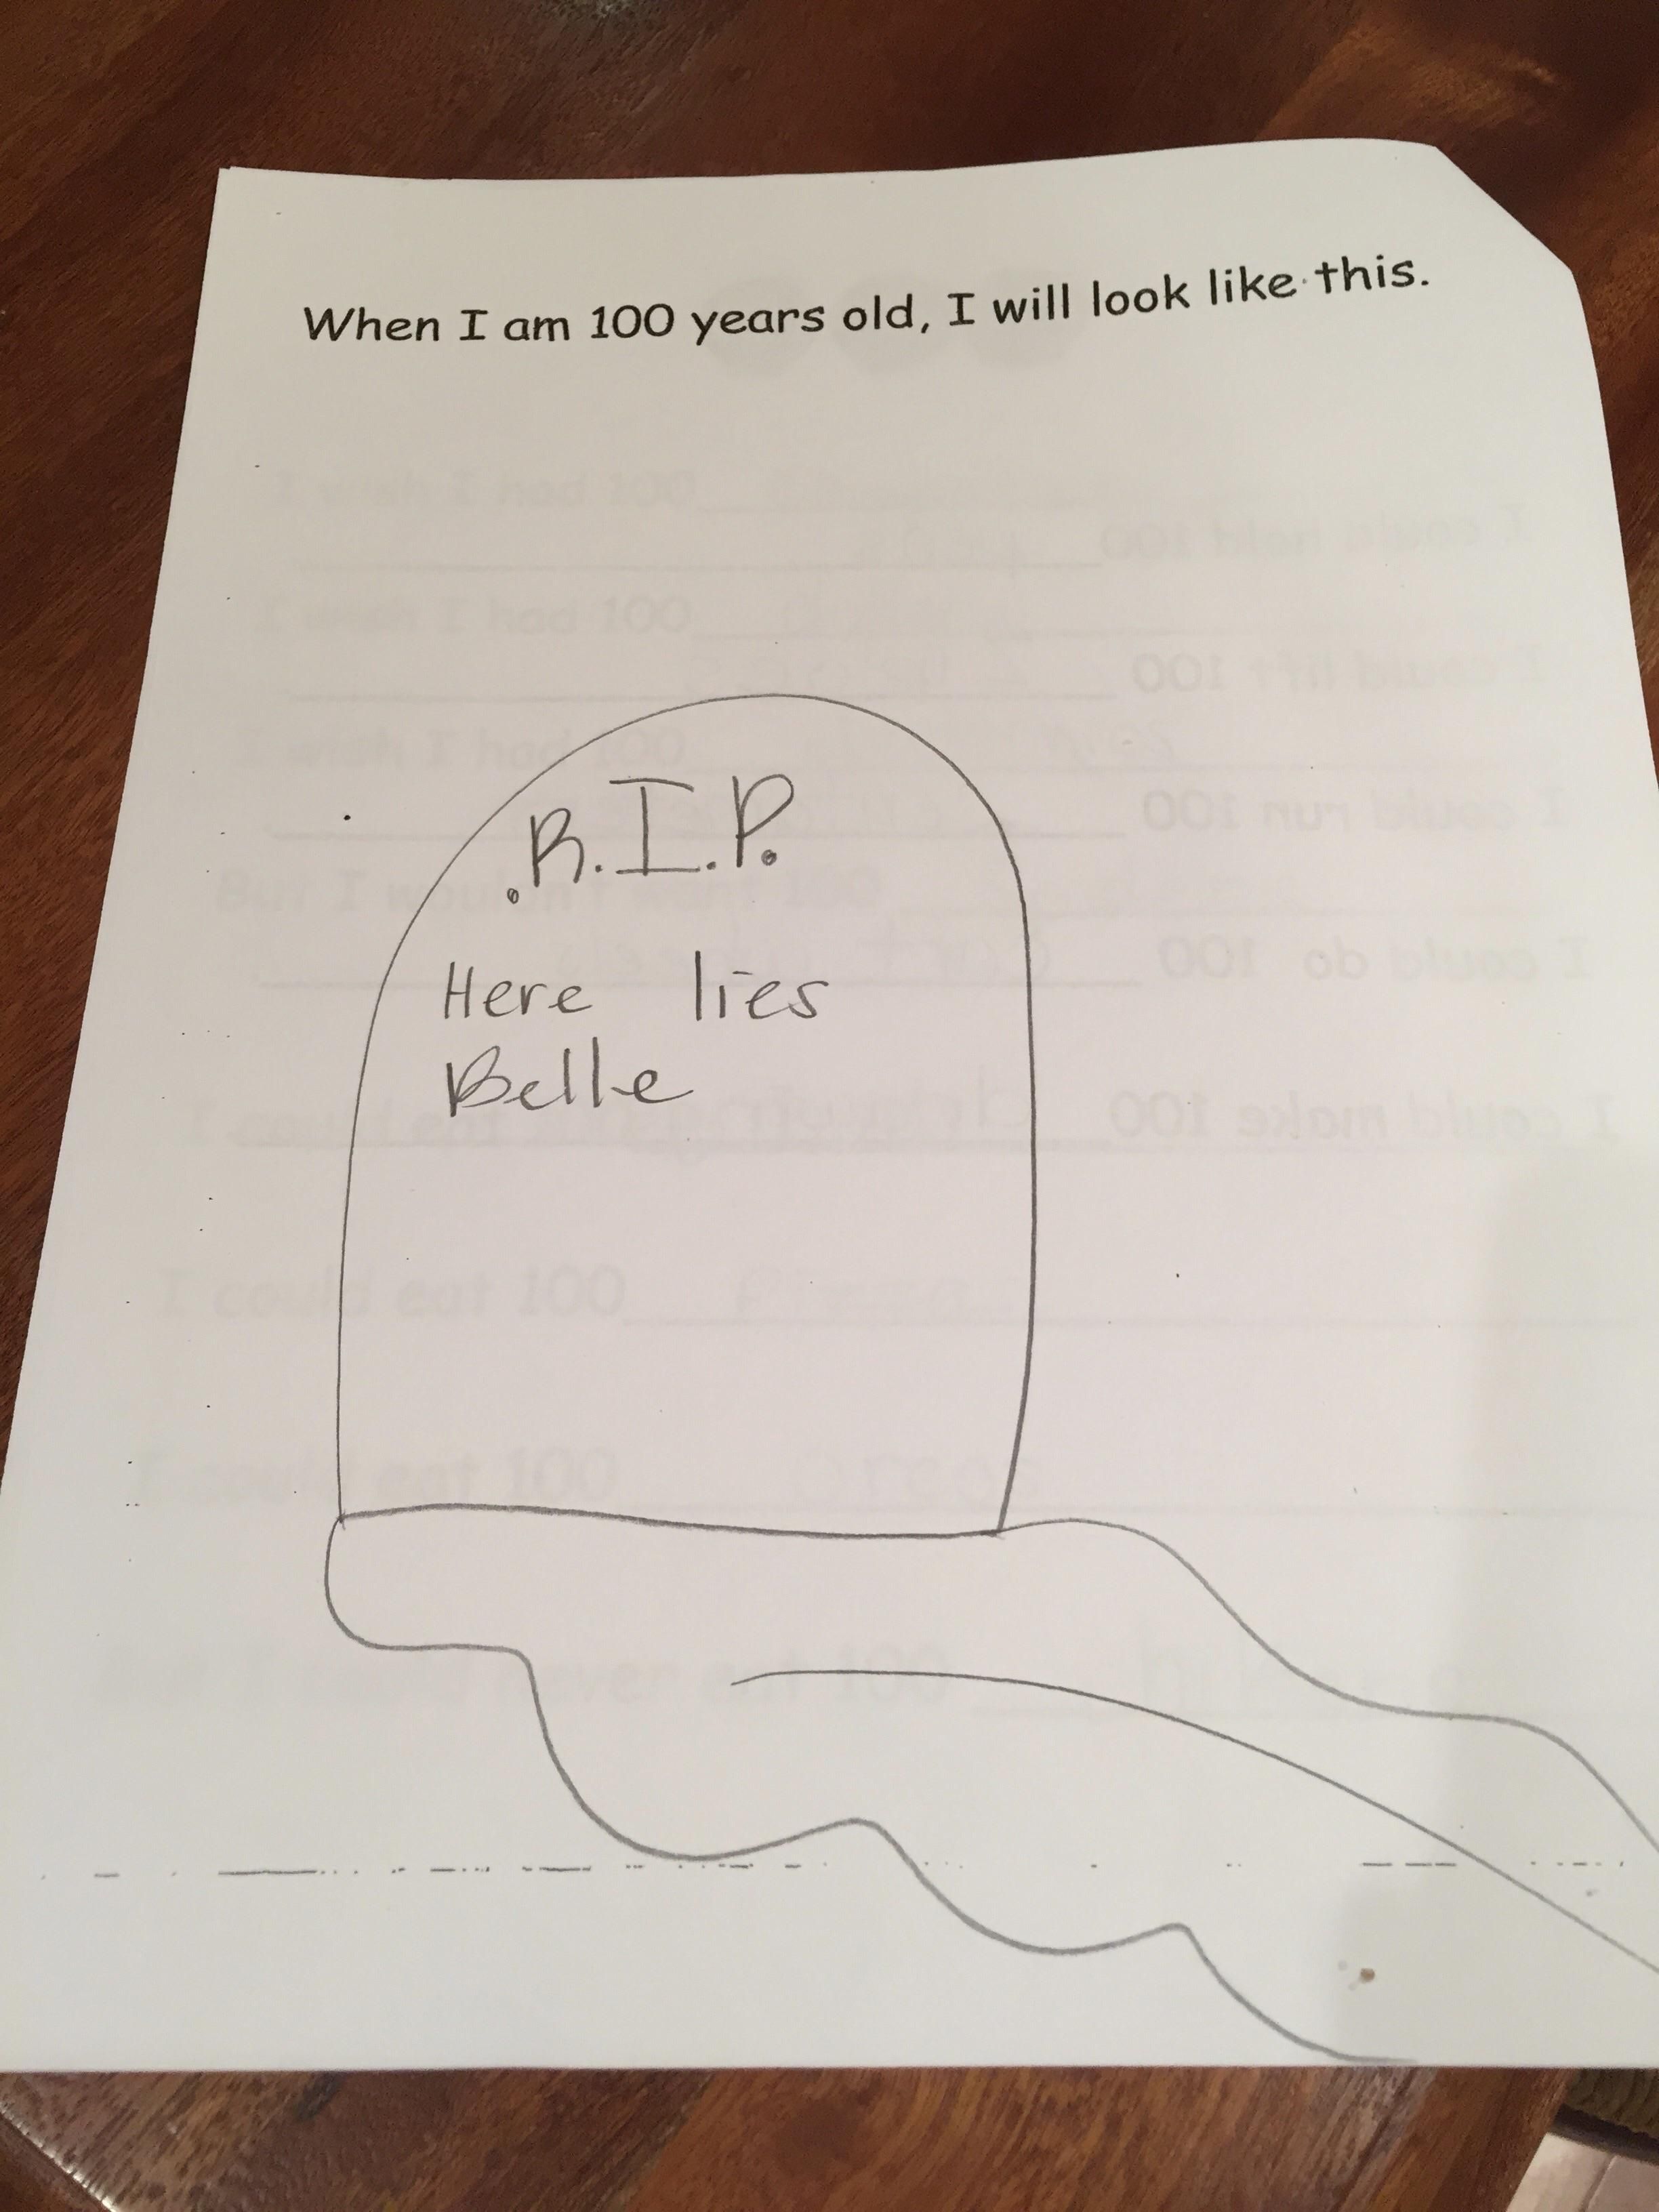 My child was asked what she would look like at 100 years old